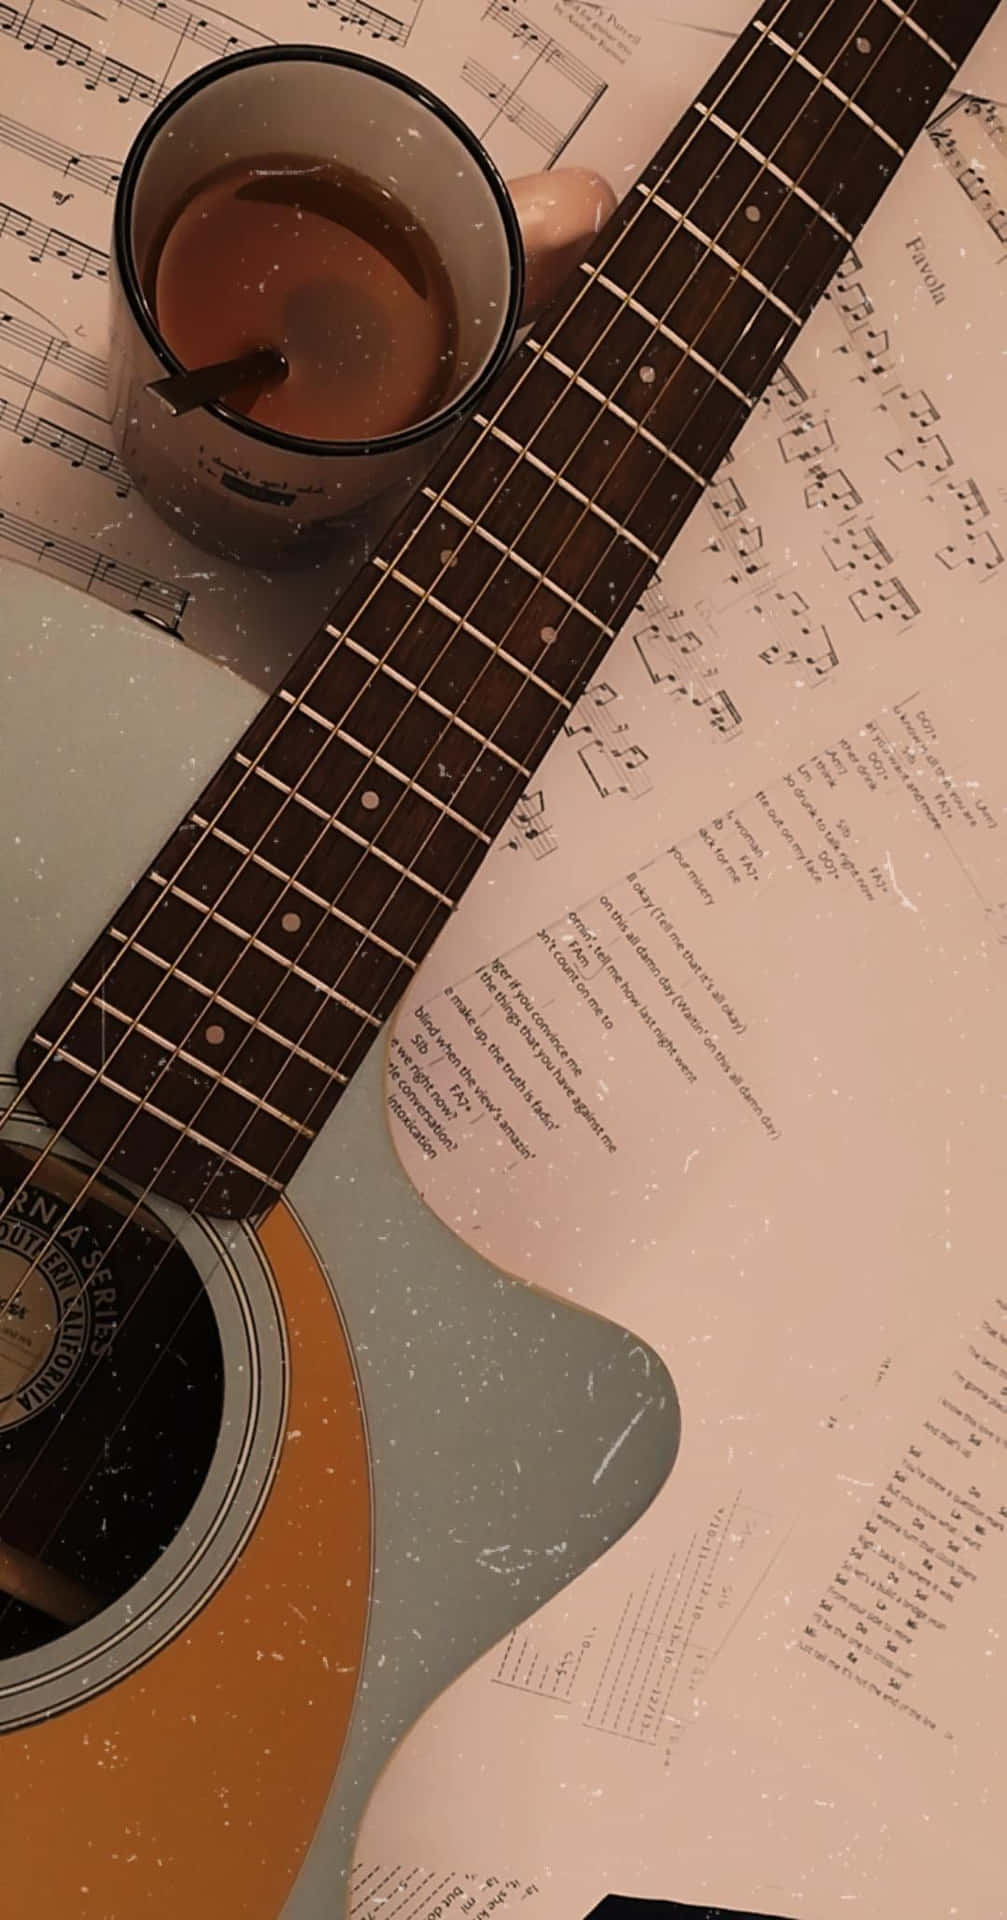 A Guitar And Cup Of Coffee On A Sheet Of Music Background